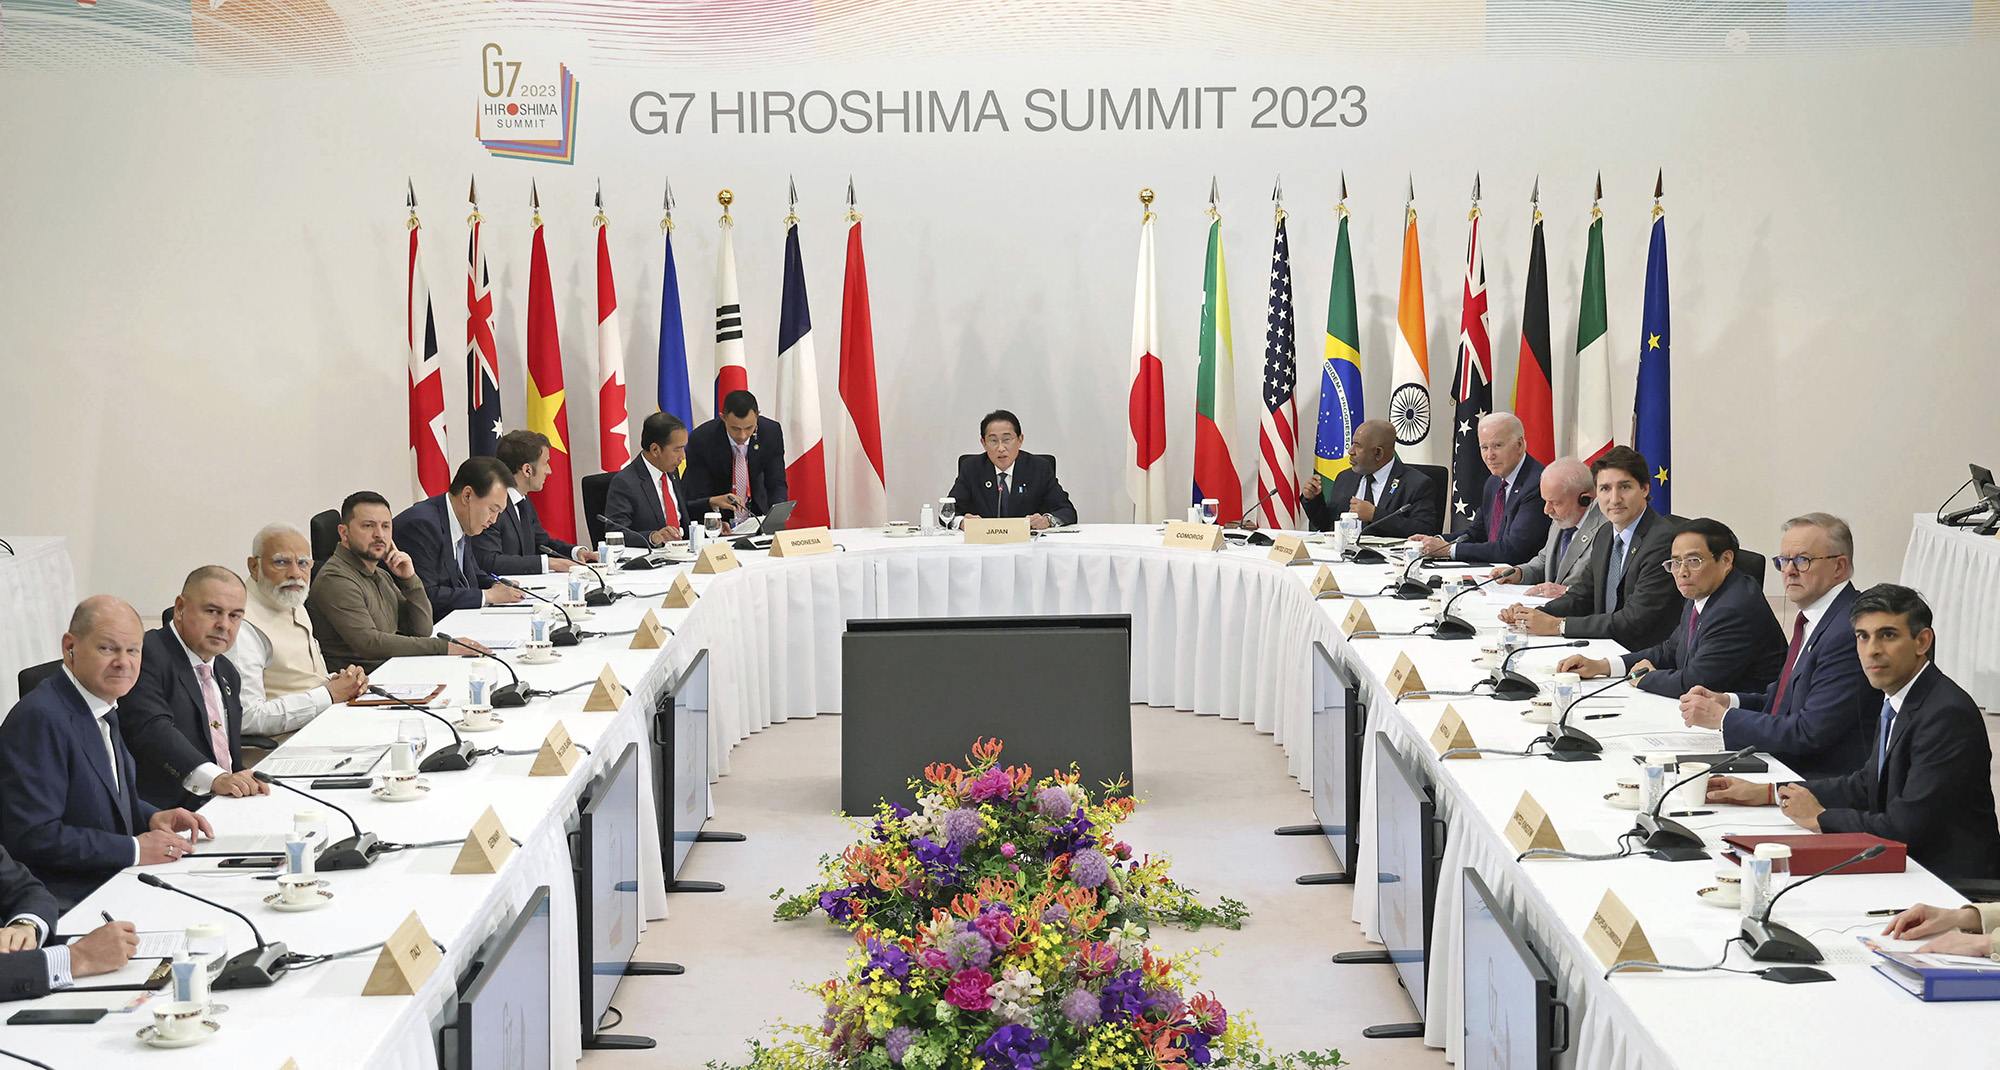 Leaders of the Group of Seven nations attend a session with other guest countries including Ukraine's Volodymyr Zelensky in Hiroshima, Japan, on May 21.